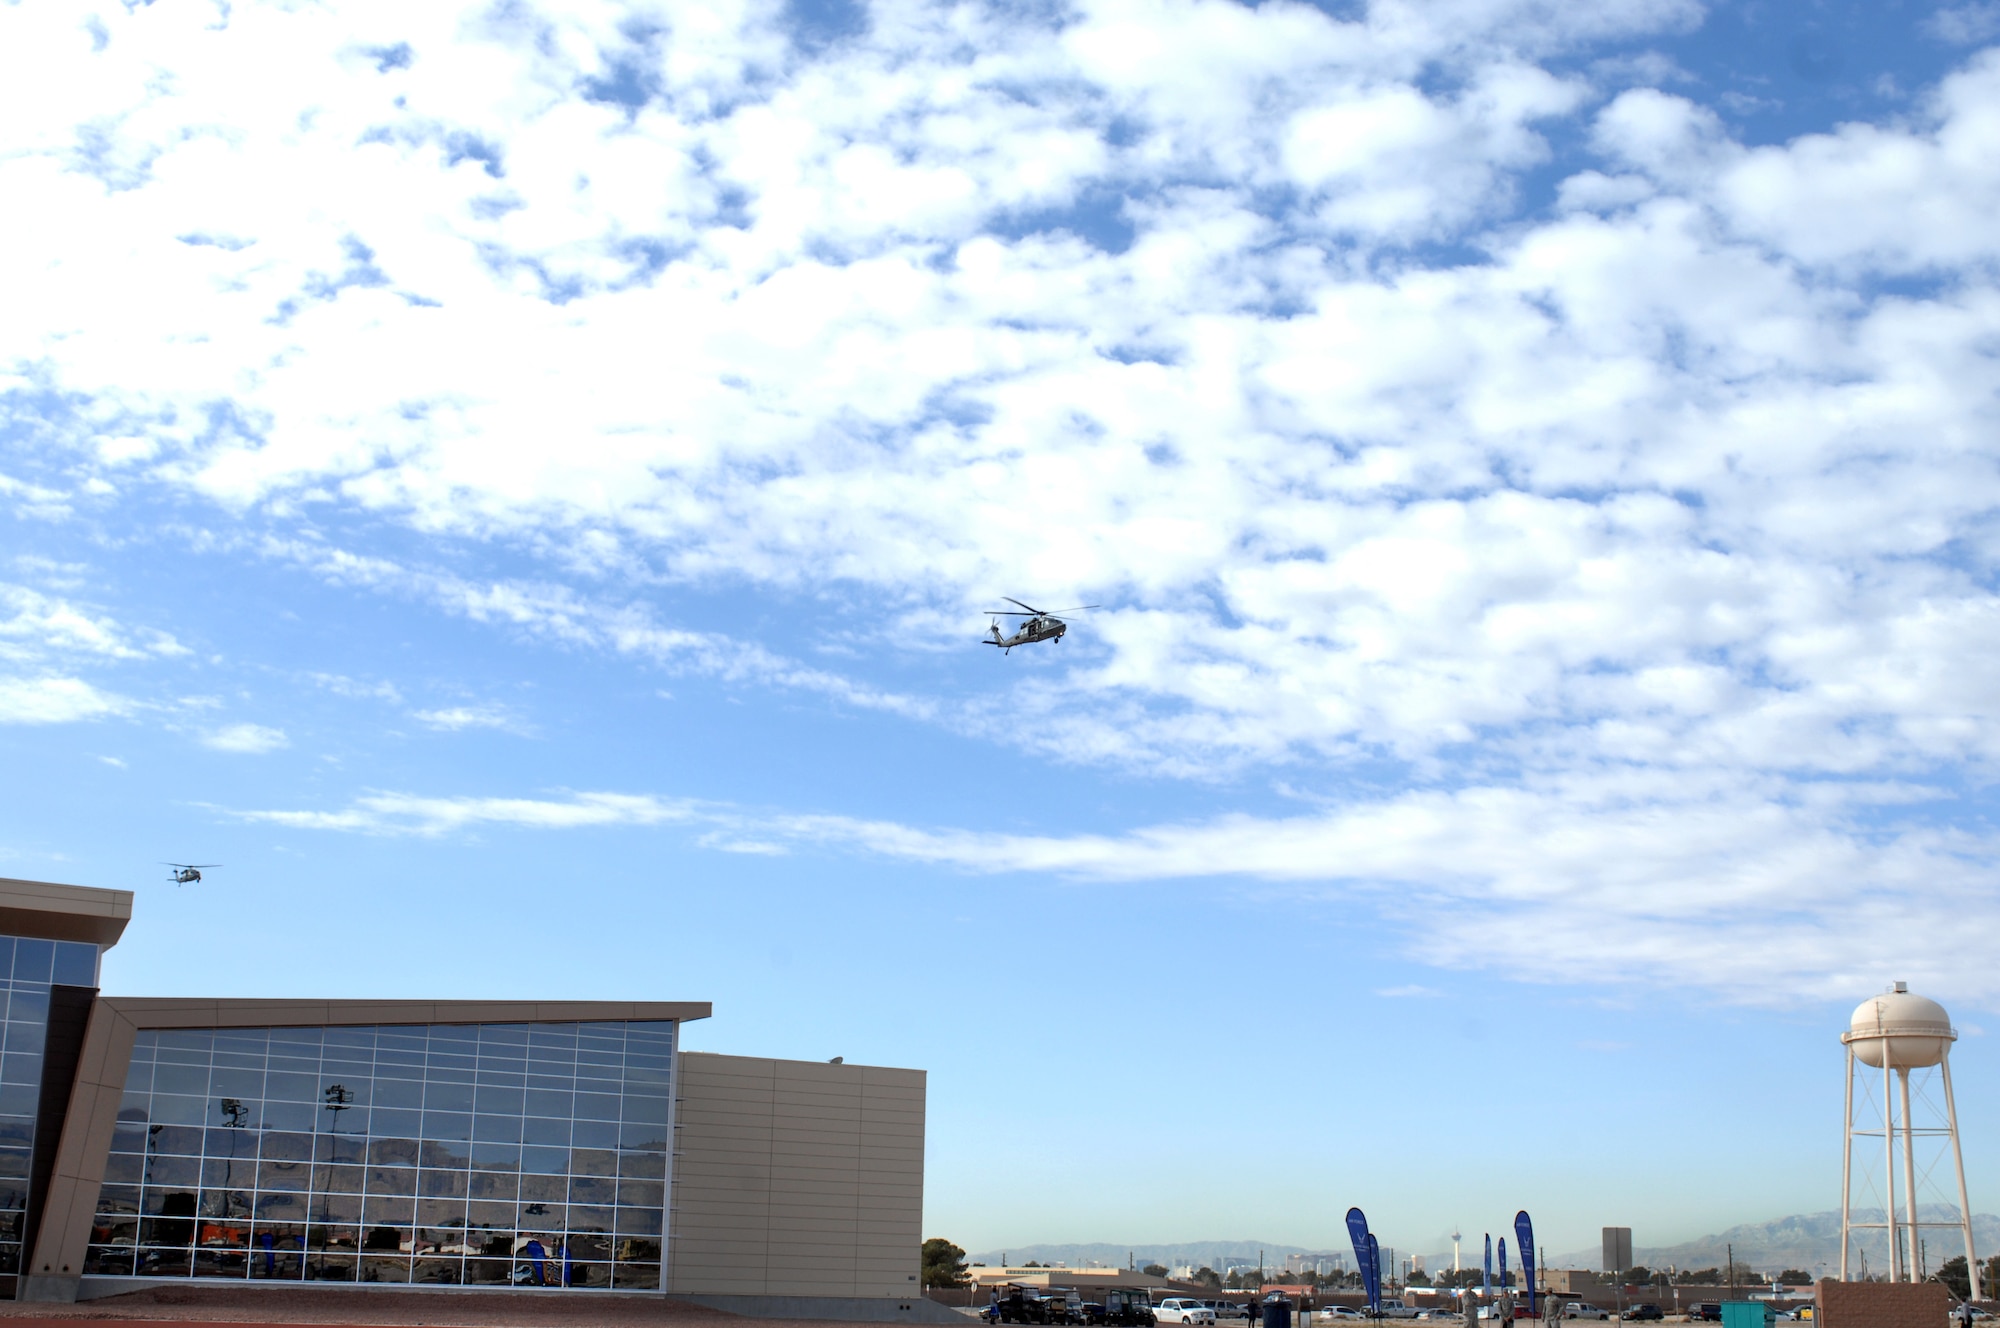 Two HH-60G Pave Hawks fly over the Warrior Fitness Center during the 2015 U.S. Air Force Trials opening ceremony at Nellis Air Force Base, Nev., Feb. 27, 2015. The opening ceremony signified the official start of the Air Force Trials at Nellis AFB, which will run Feb. 27 to March 5. (U.S. Air Force photo by Staff Sgt. Jack Sanders)